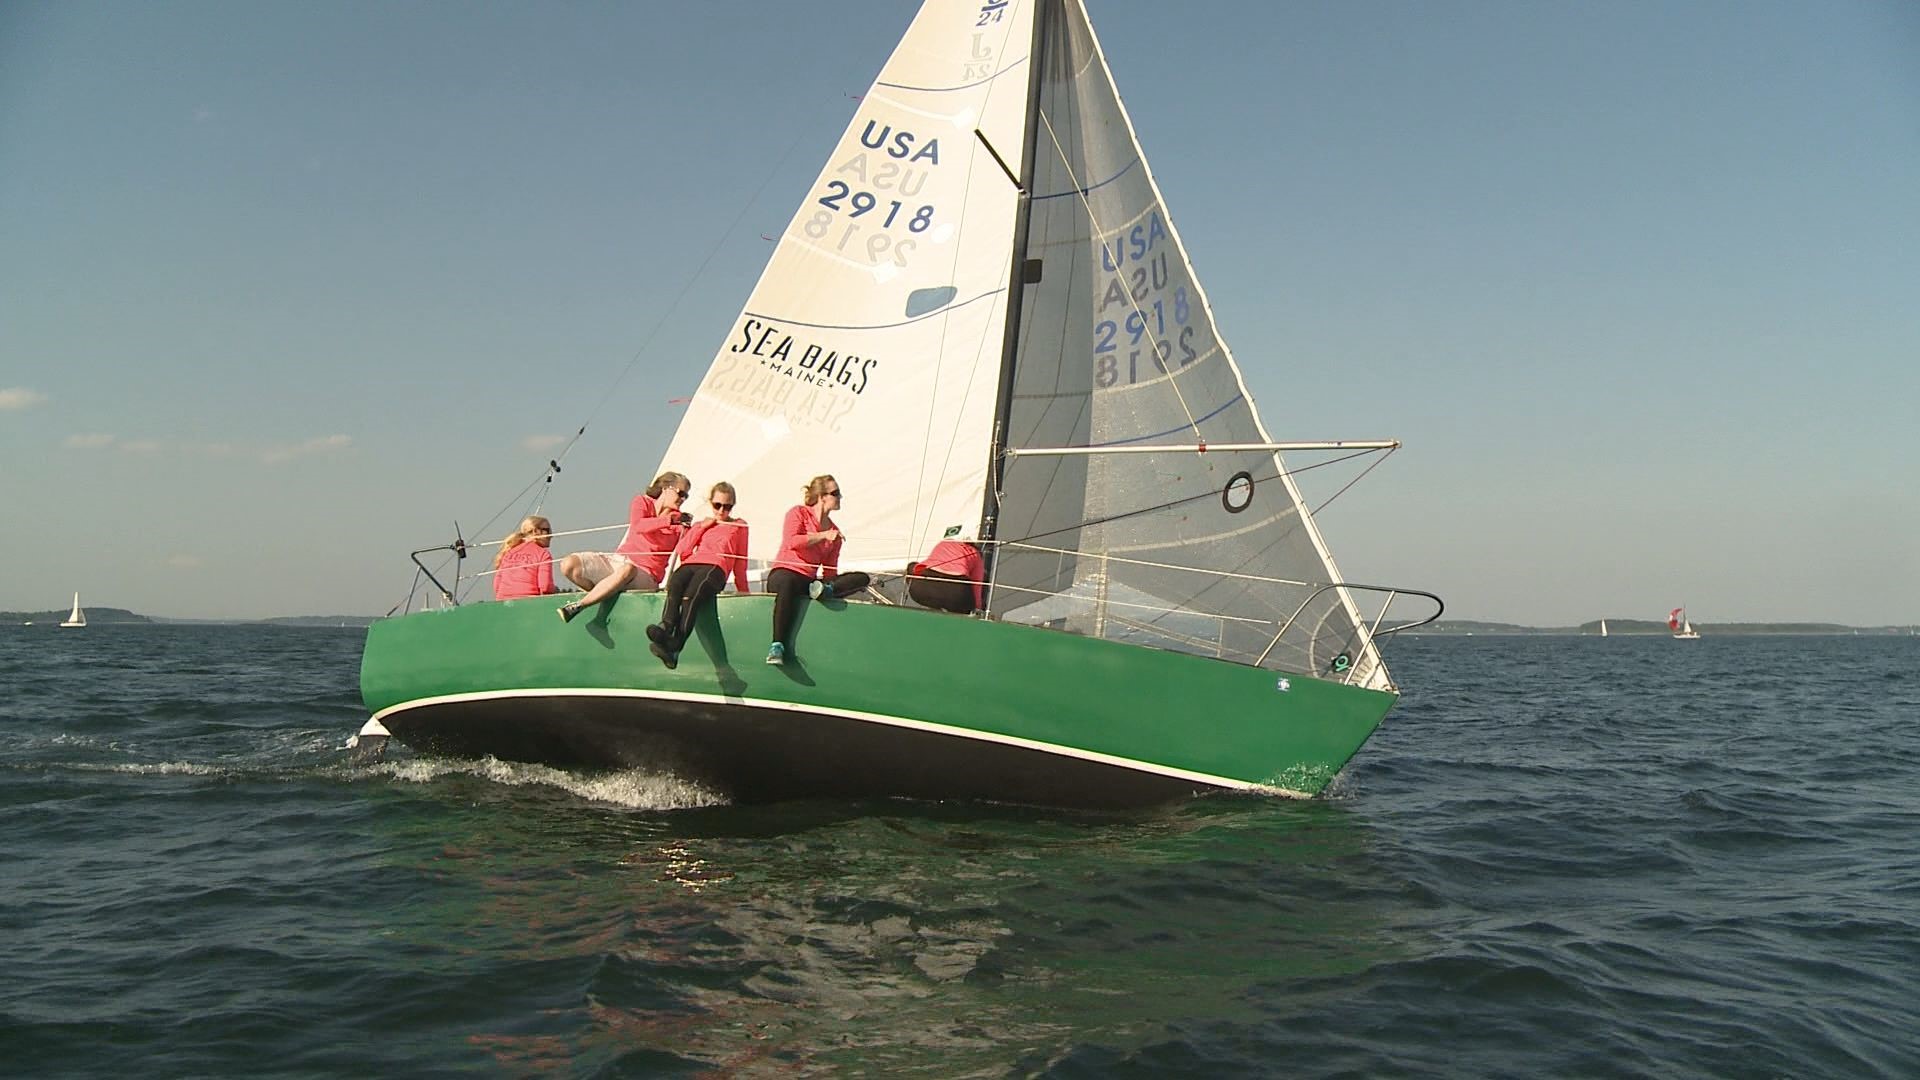 The Sea Bags Women's Sailing Team is ready to take on the world.